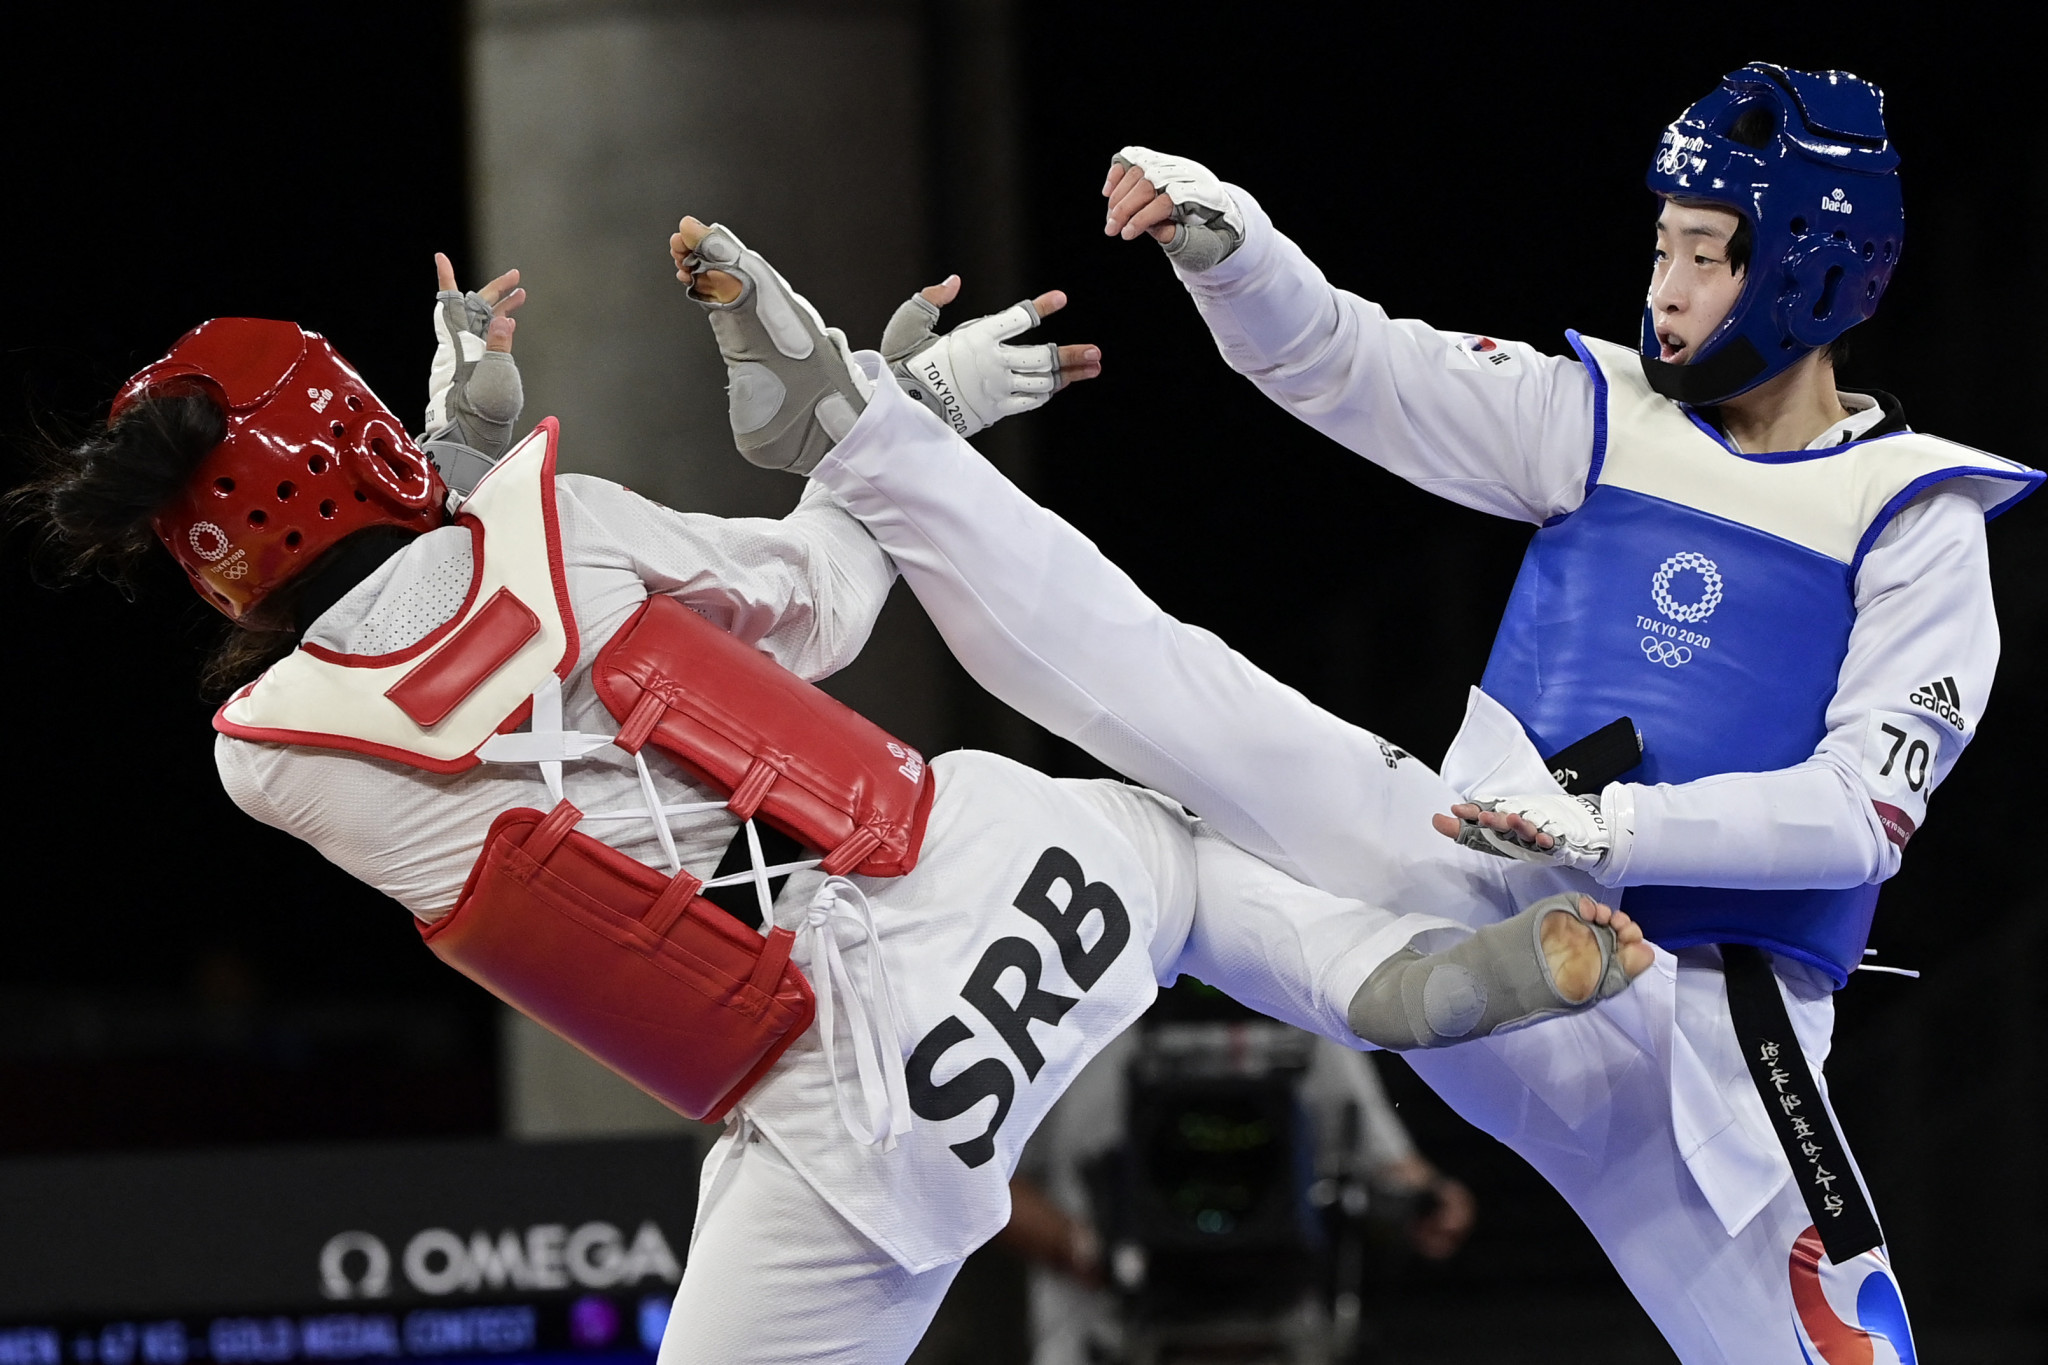 Taekwondo has become a regular part of the Olympic programme ©Getty Images